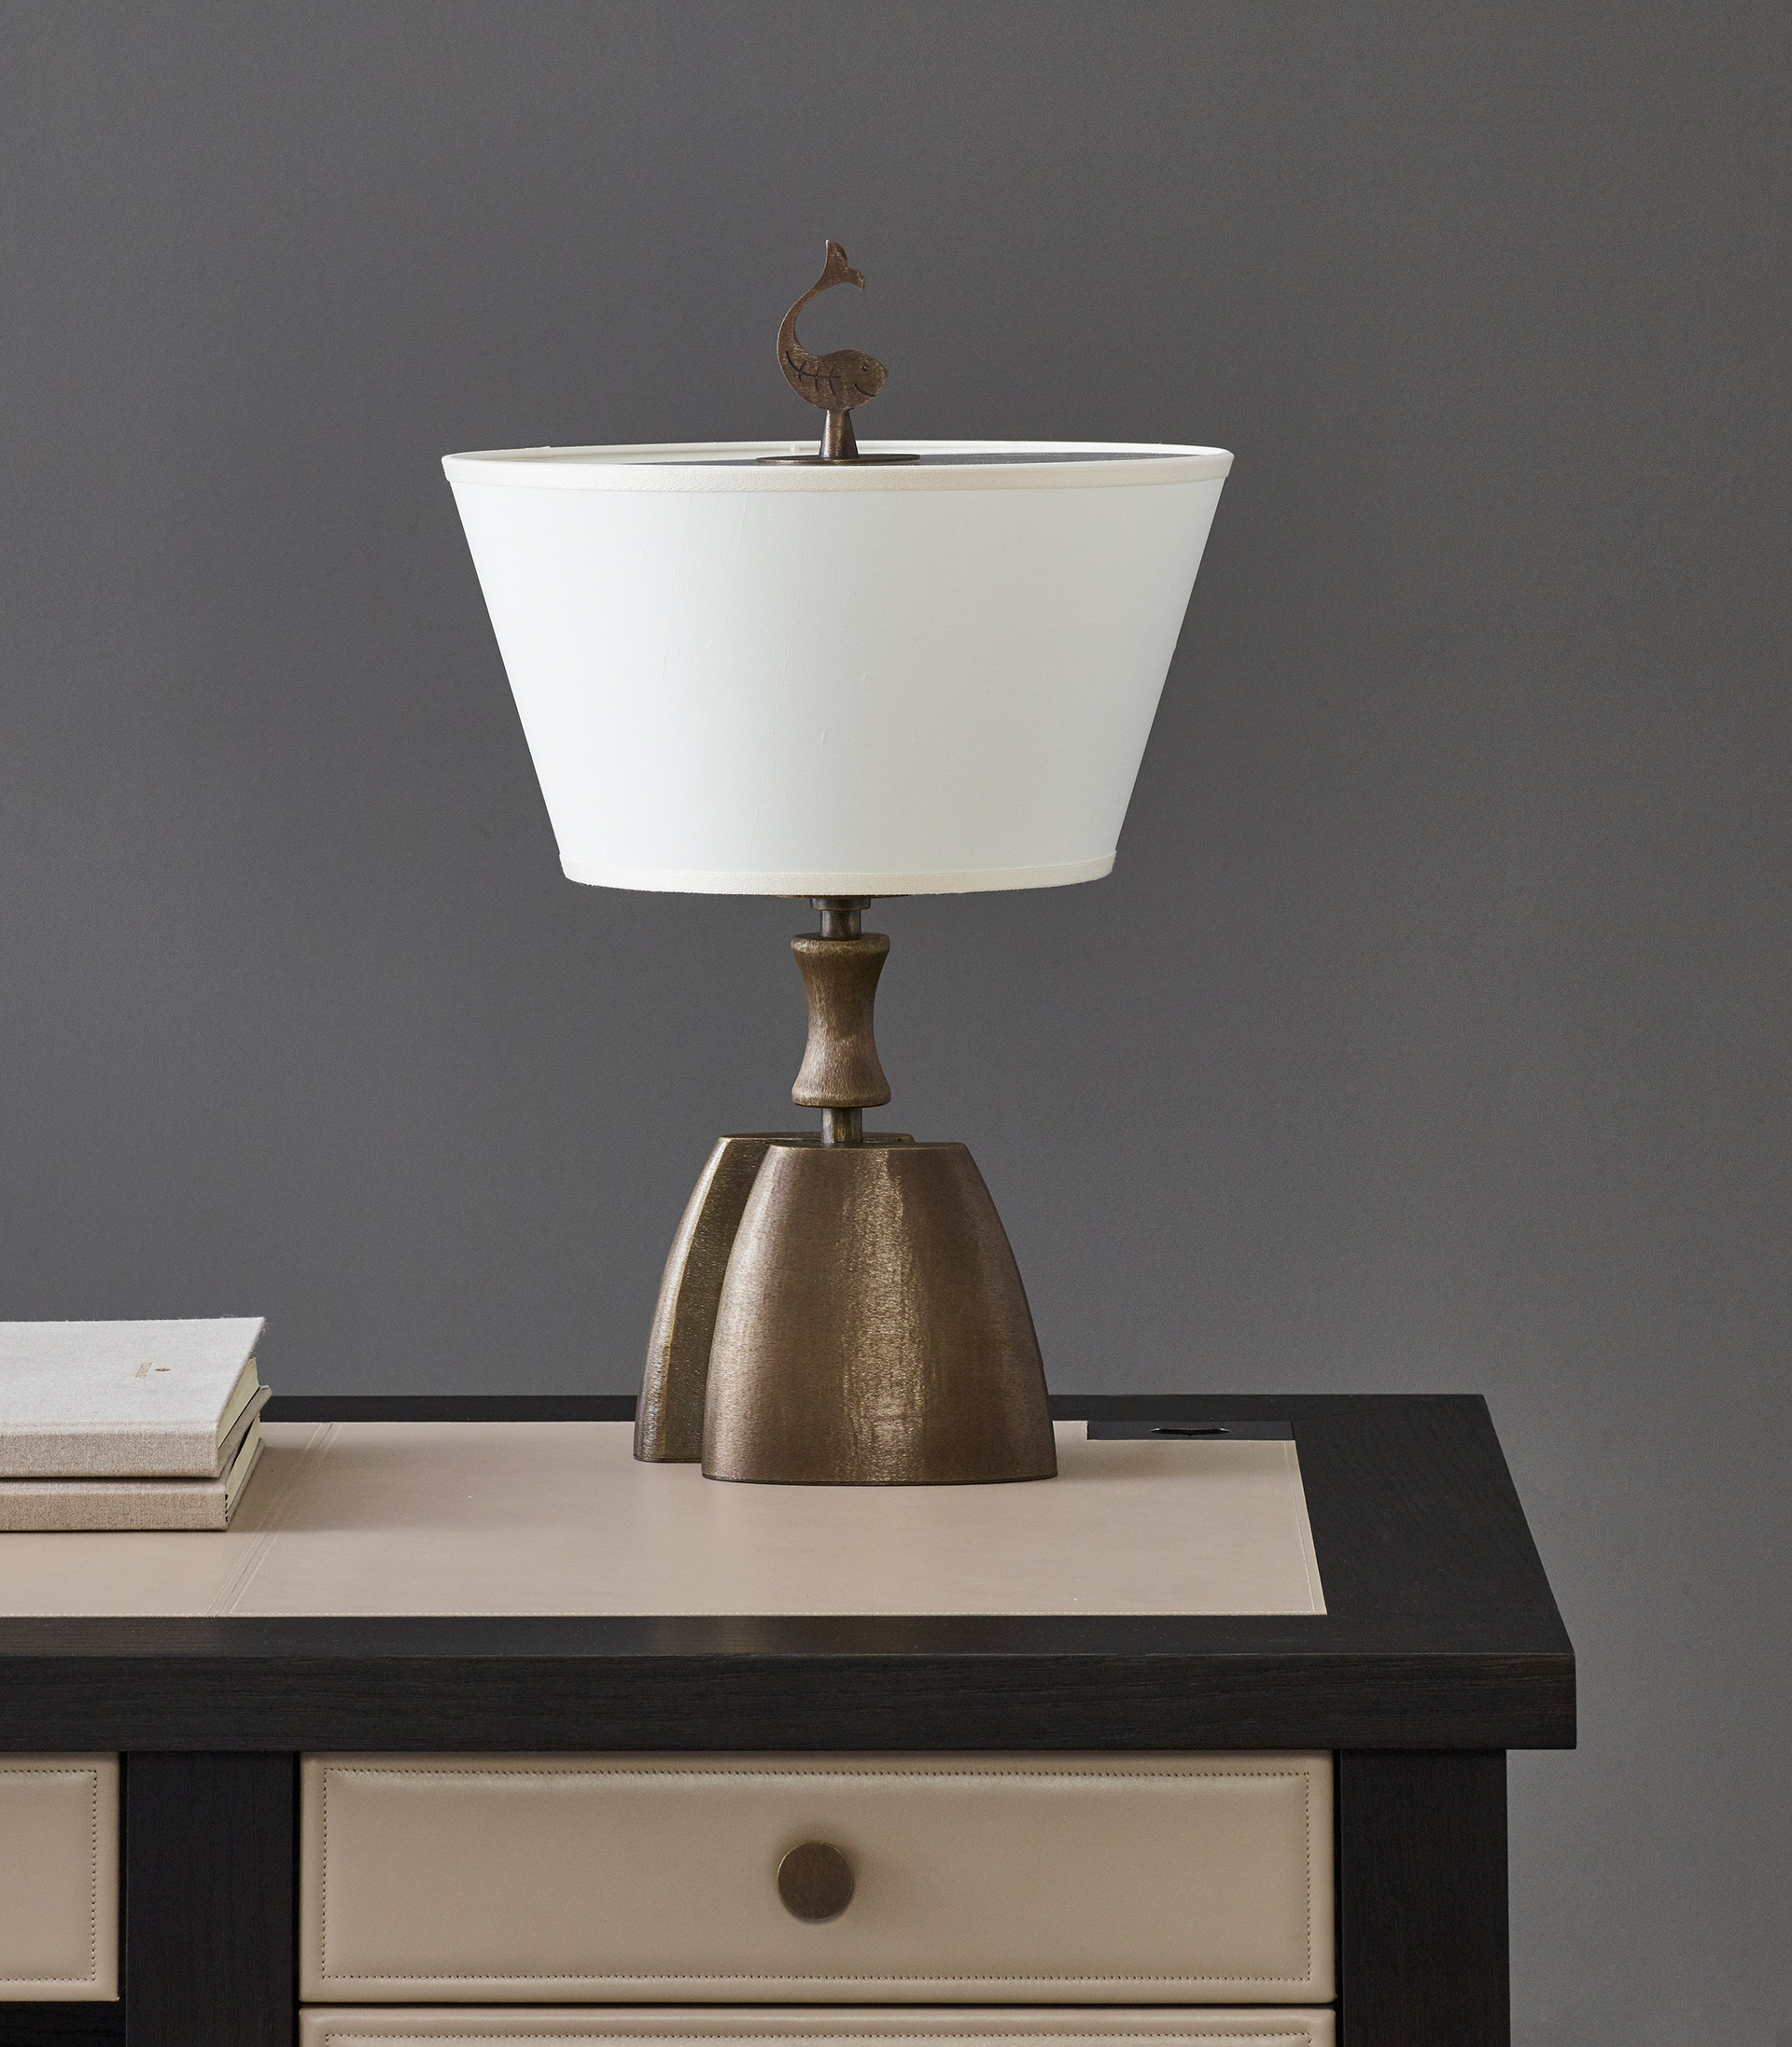 Misultin is a table LED lamp with bronze structure with a linen, cotton or hand-embroidered silk lampshade, from Promemoria's catalogue | Promemoria